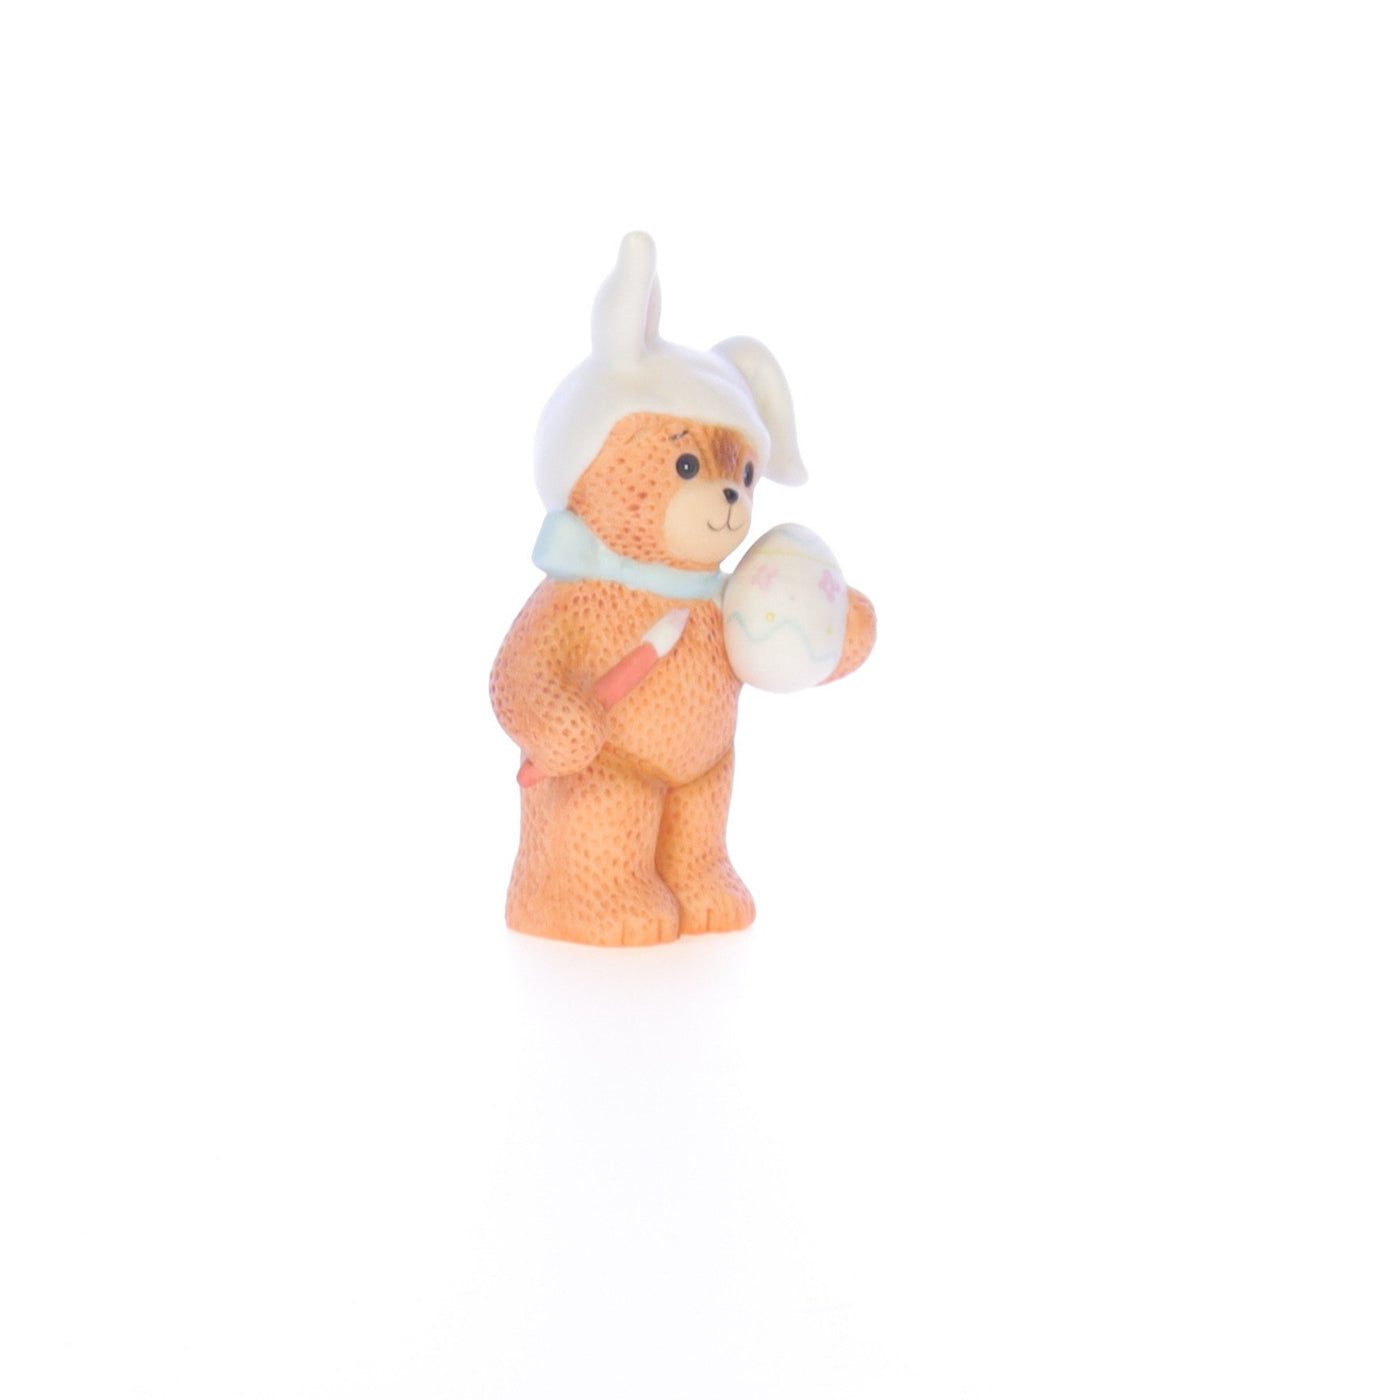 Lucy_And_Me_by_Lucy_Atwell_Porcelain_Figurine_Bunny_Bear_Painting_Easter_Egg_Lucy_Unknown_055_08